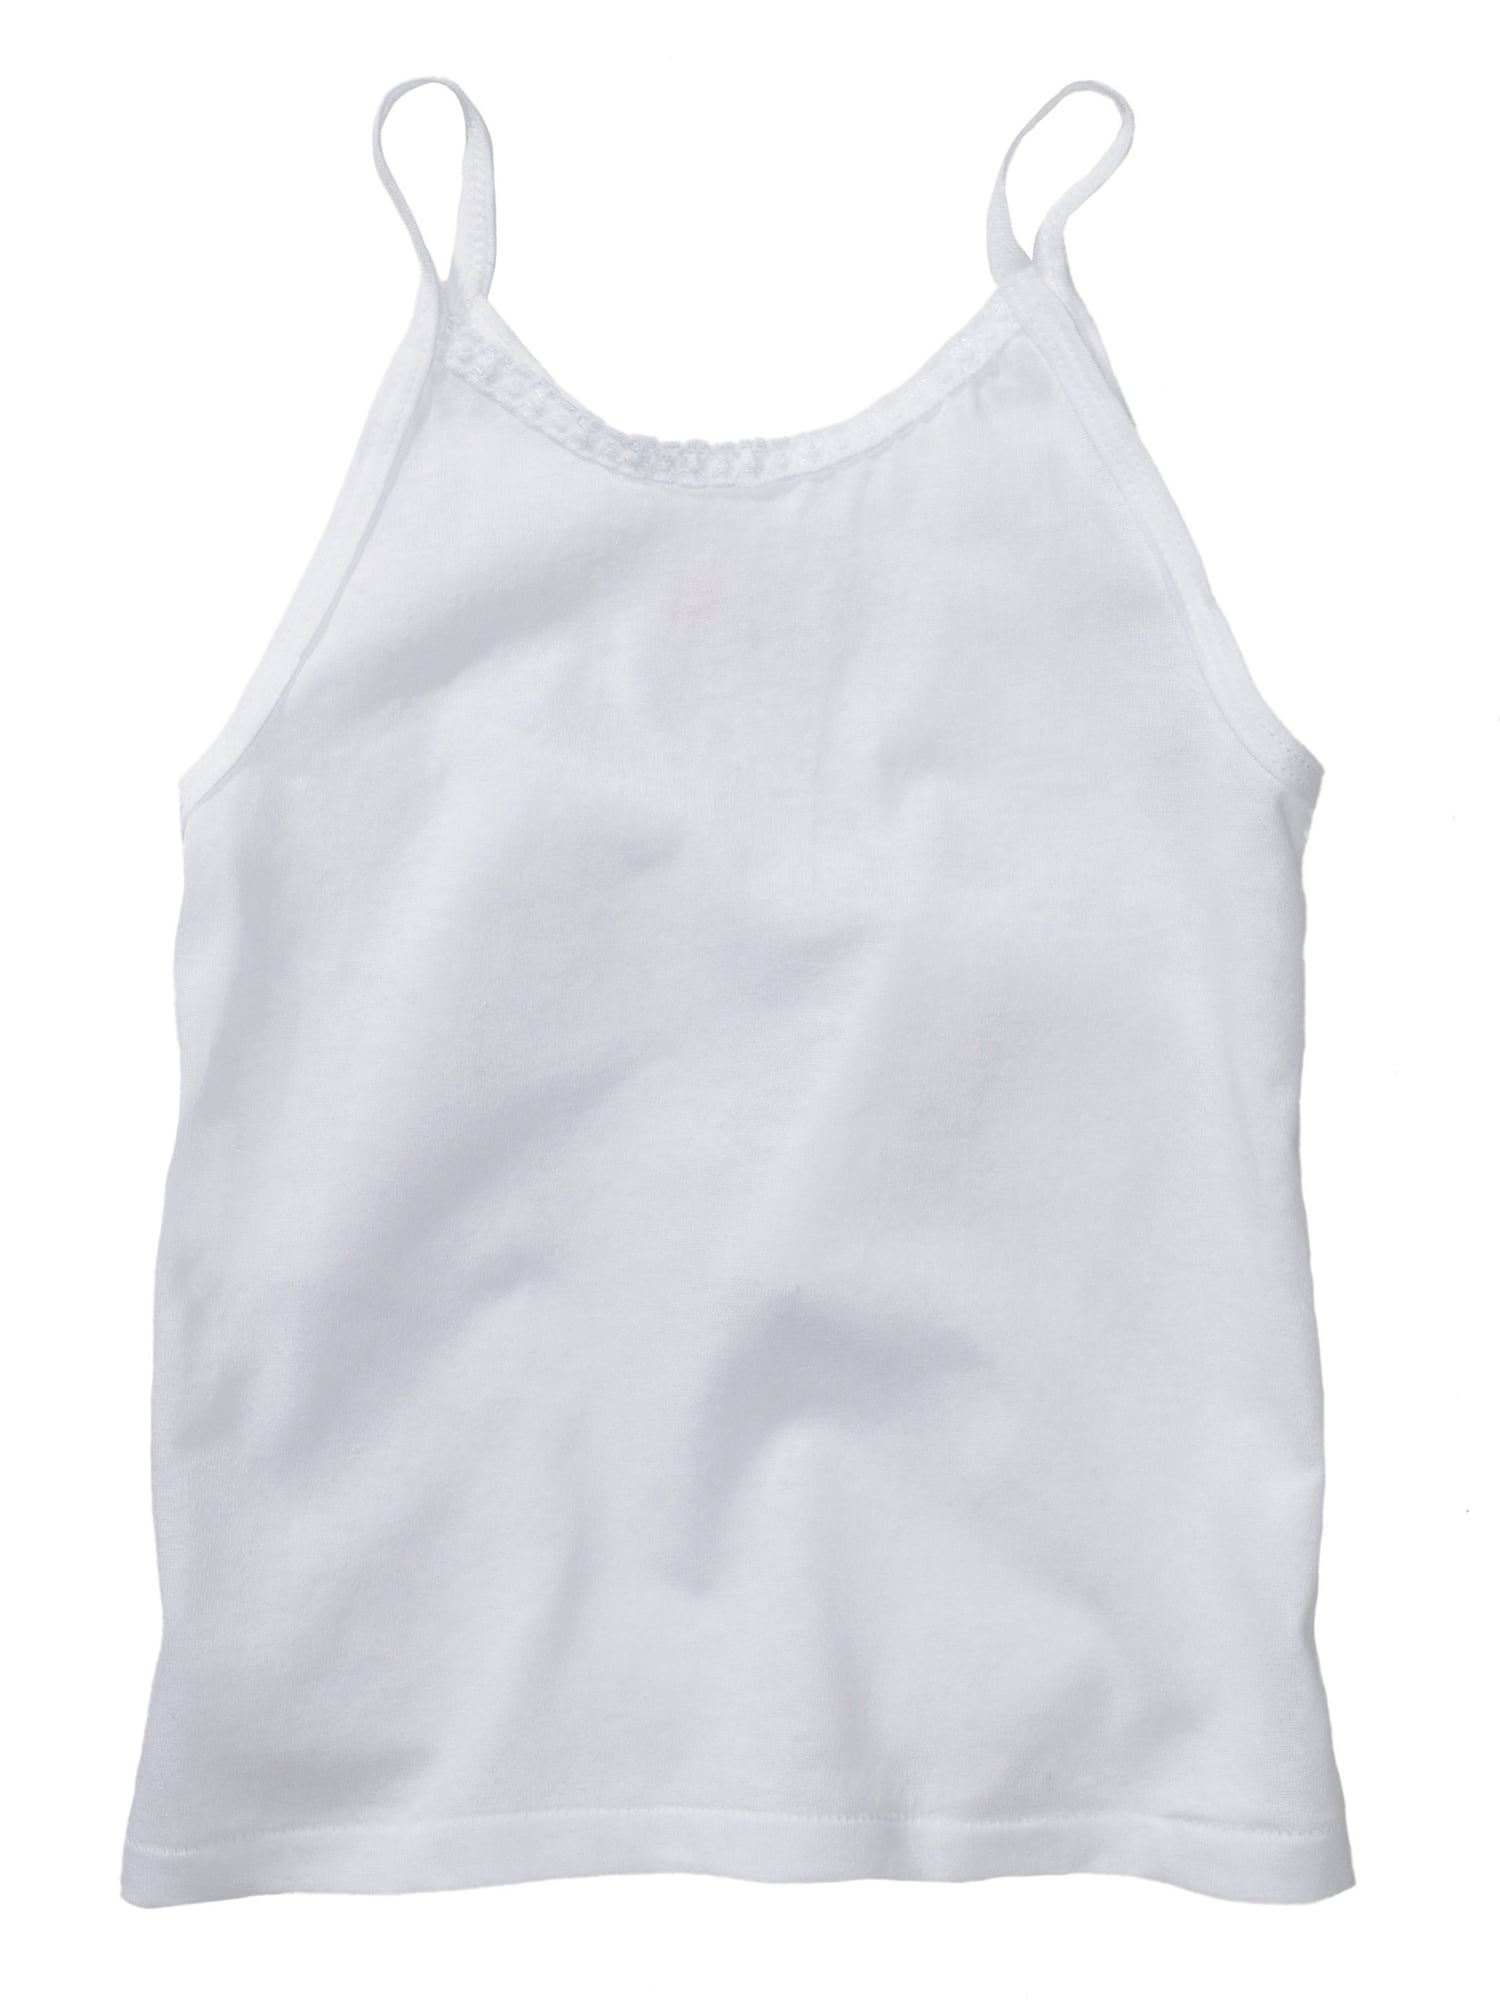 Ivay Baby Girls Toddler Kids Camisole Tank Top Solid Soft Cotton Undershirts